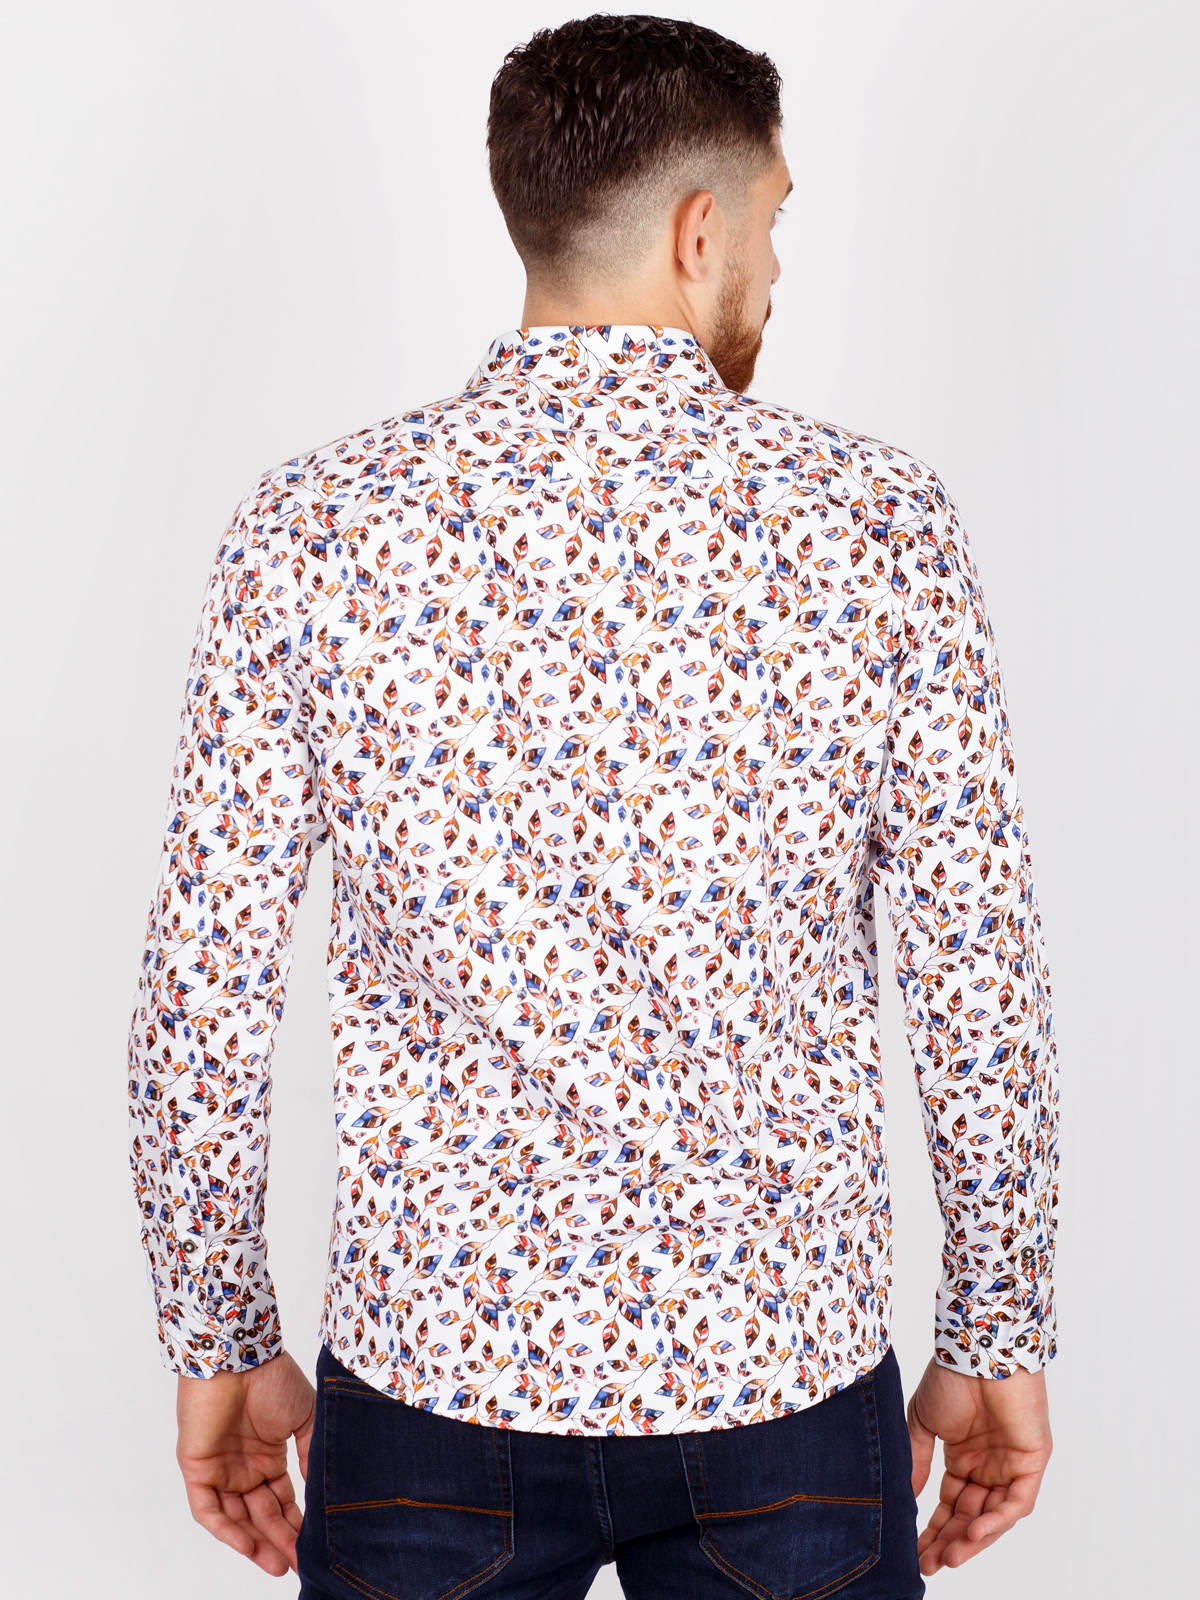 Fitted shirt with a print of colored lea - 21498 € 32.62 img4